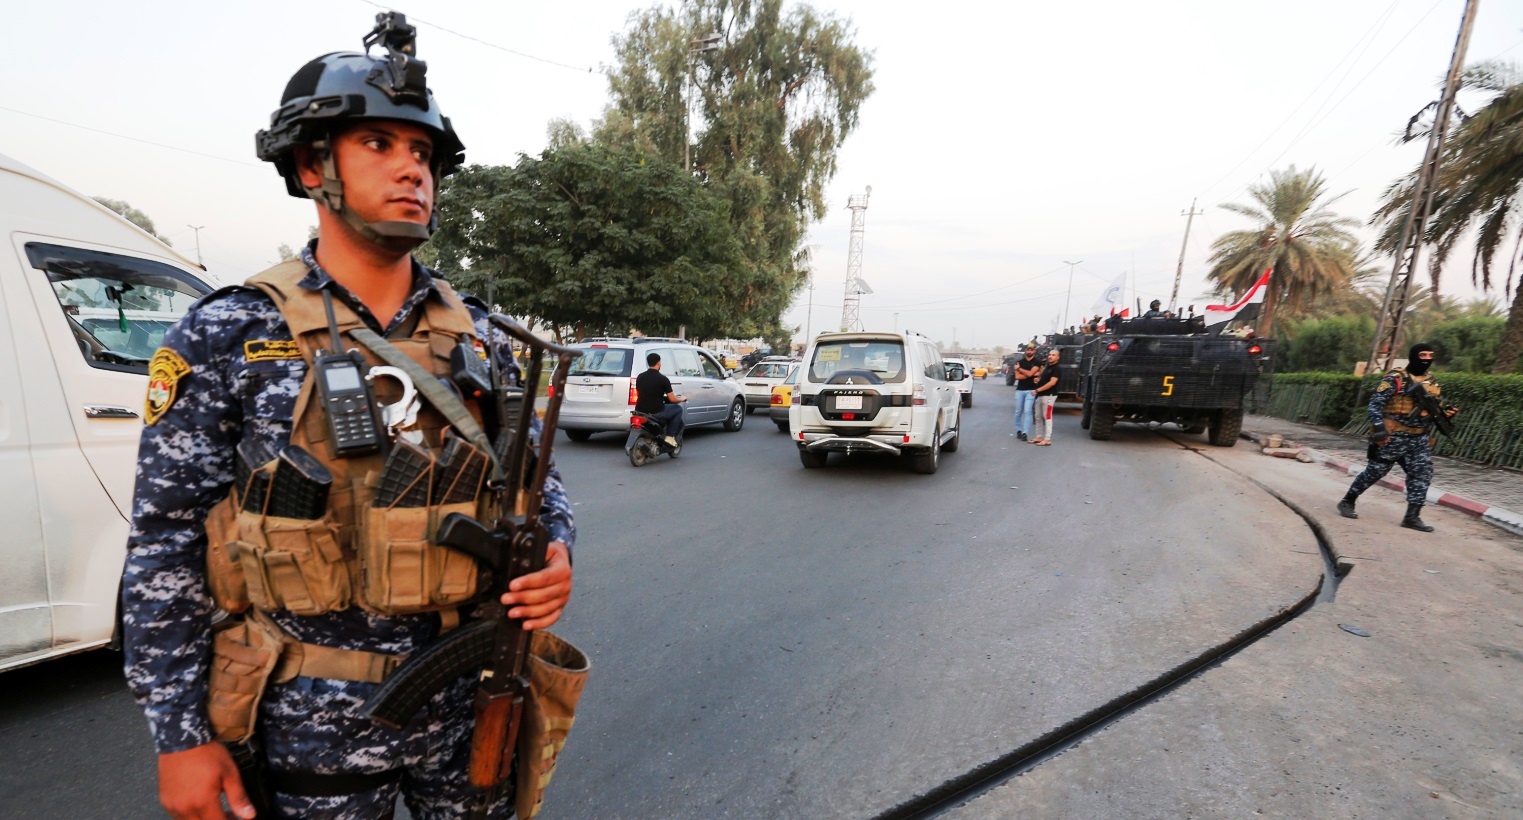 ASPI: Iraqi security forces are far from being self-sustaining or free of outside influences